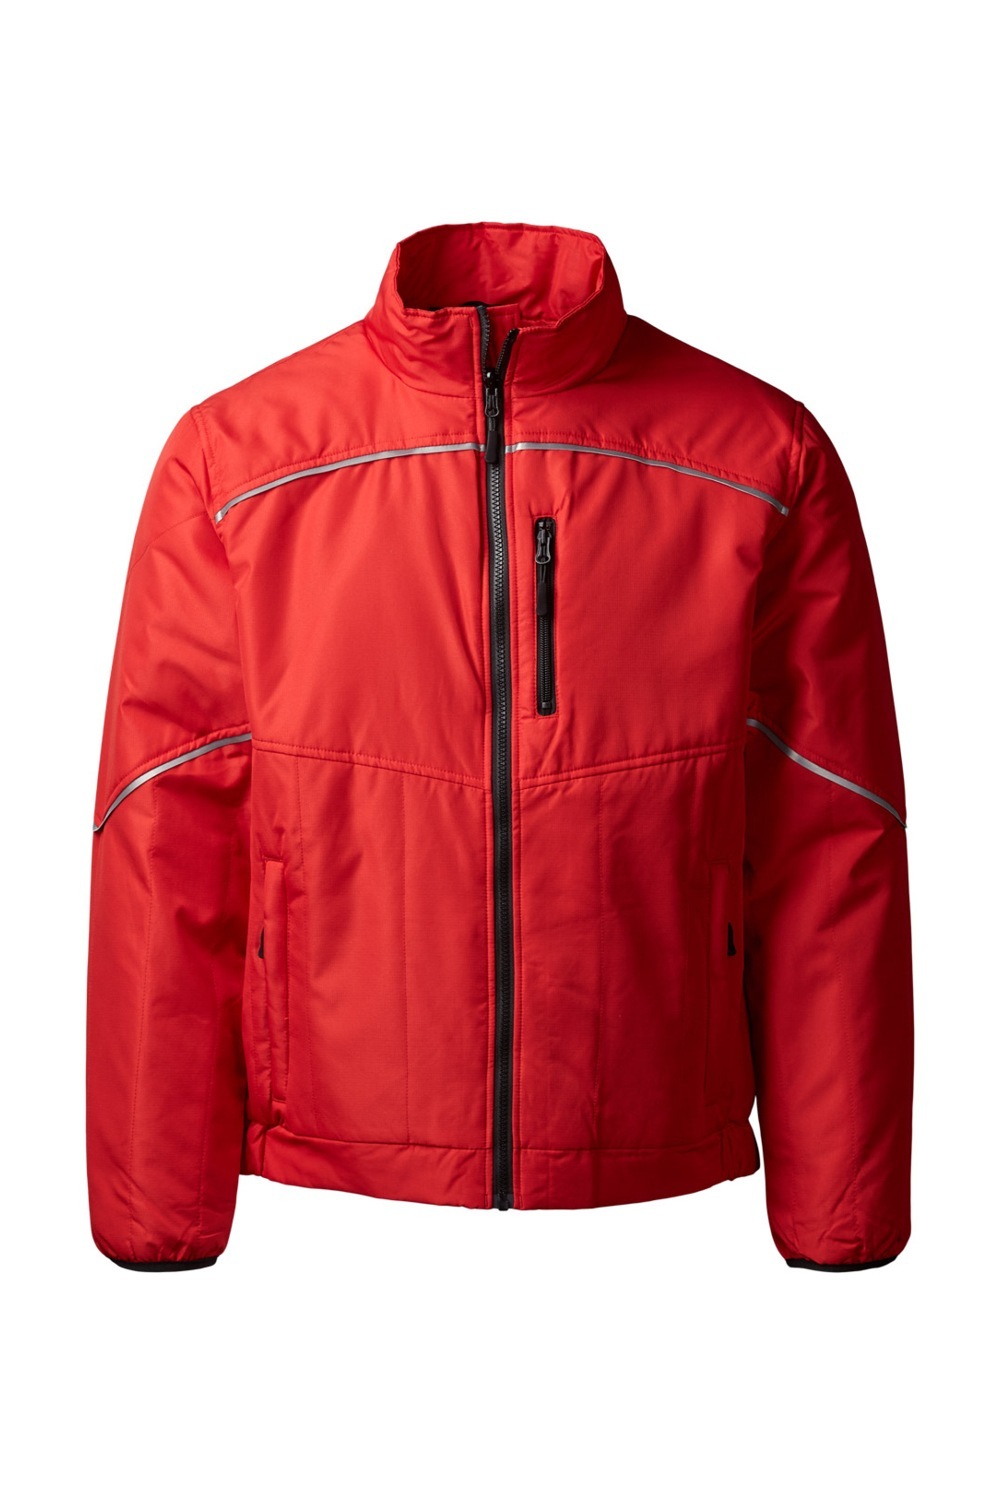 5100 xplor quilted jacket unisex red 4000 front